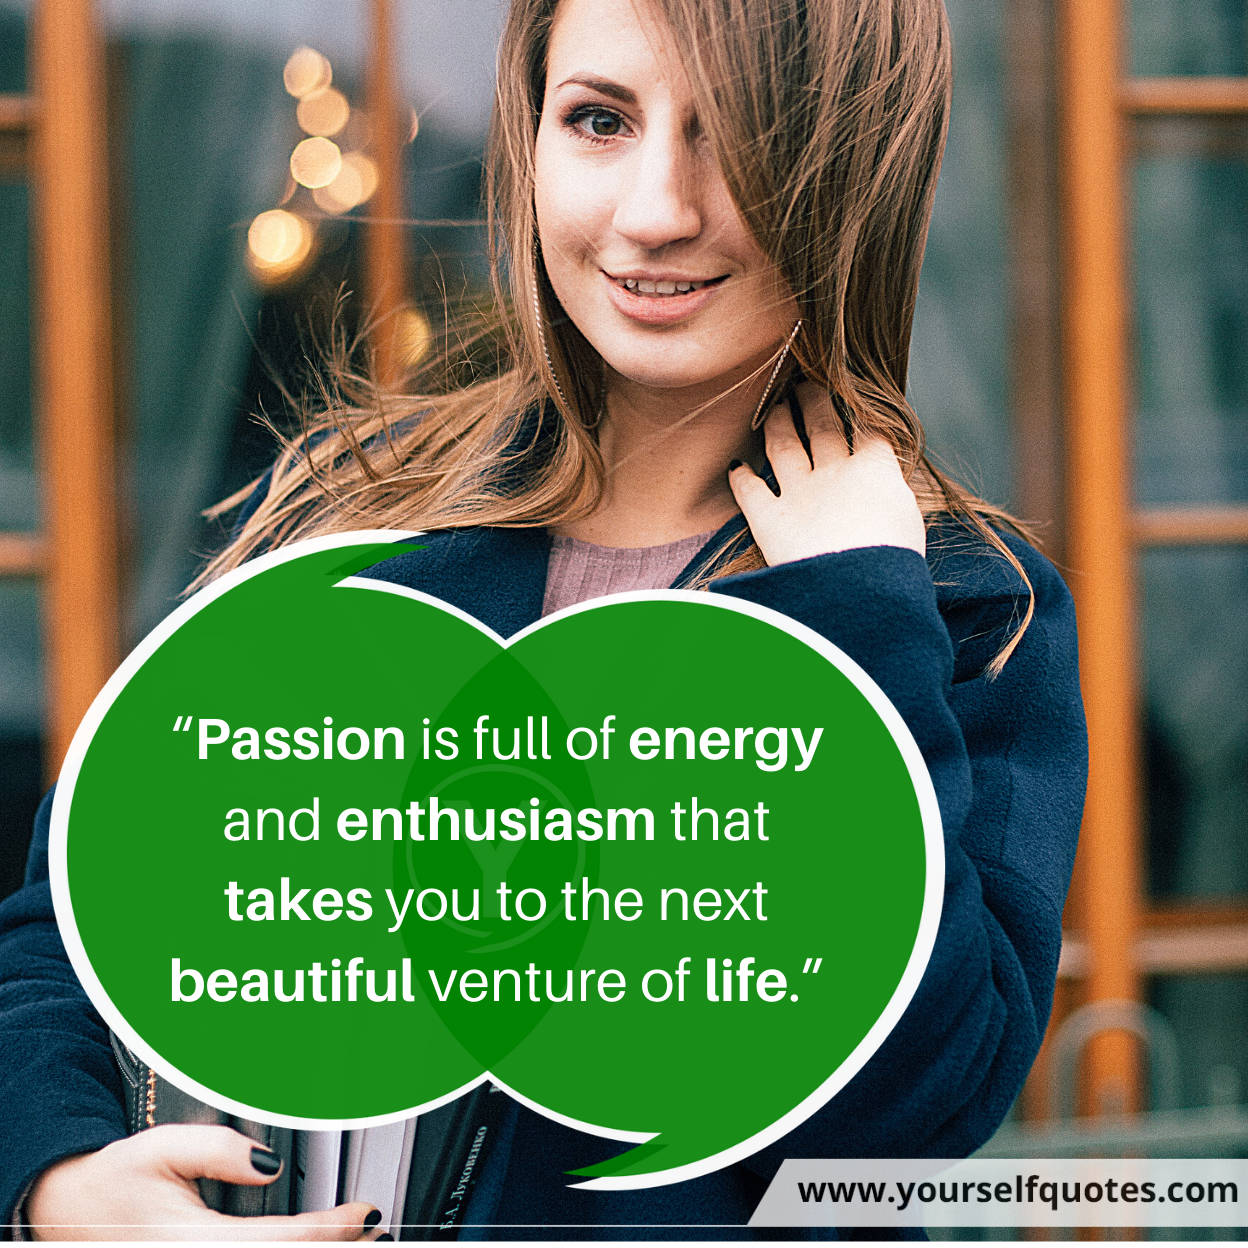 118 Passion Quotes That Will Inspire You To Pursue Passion Immense Motivation